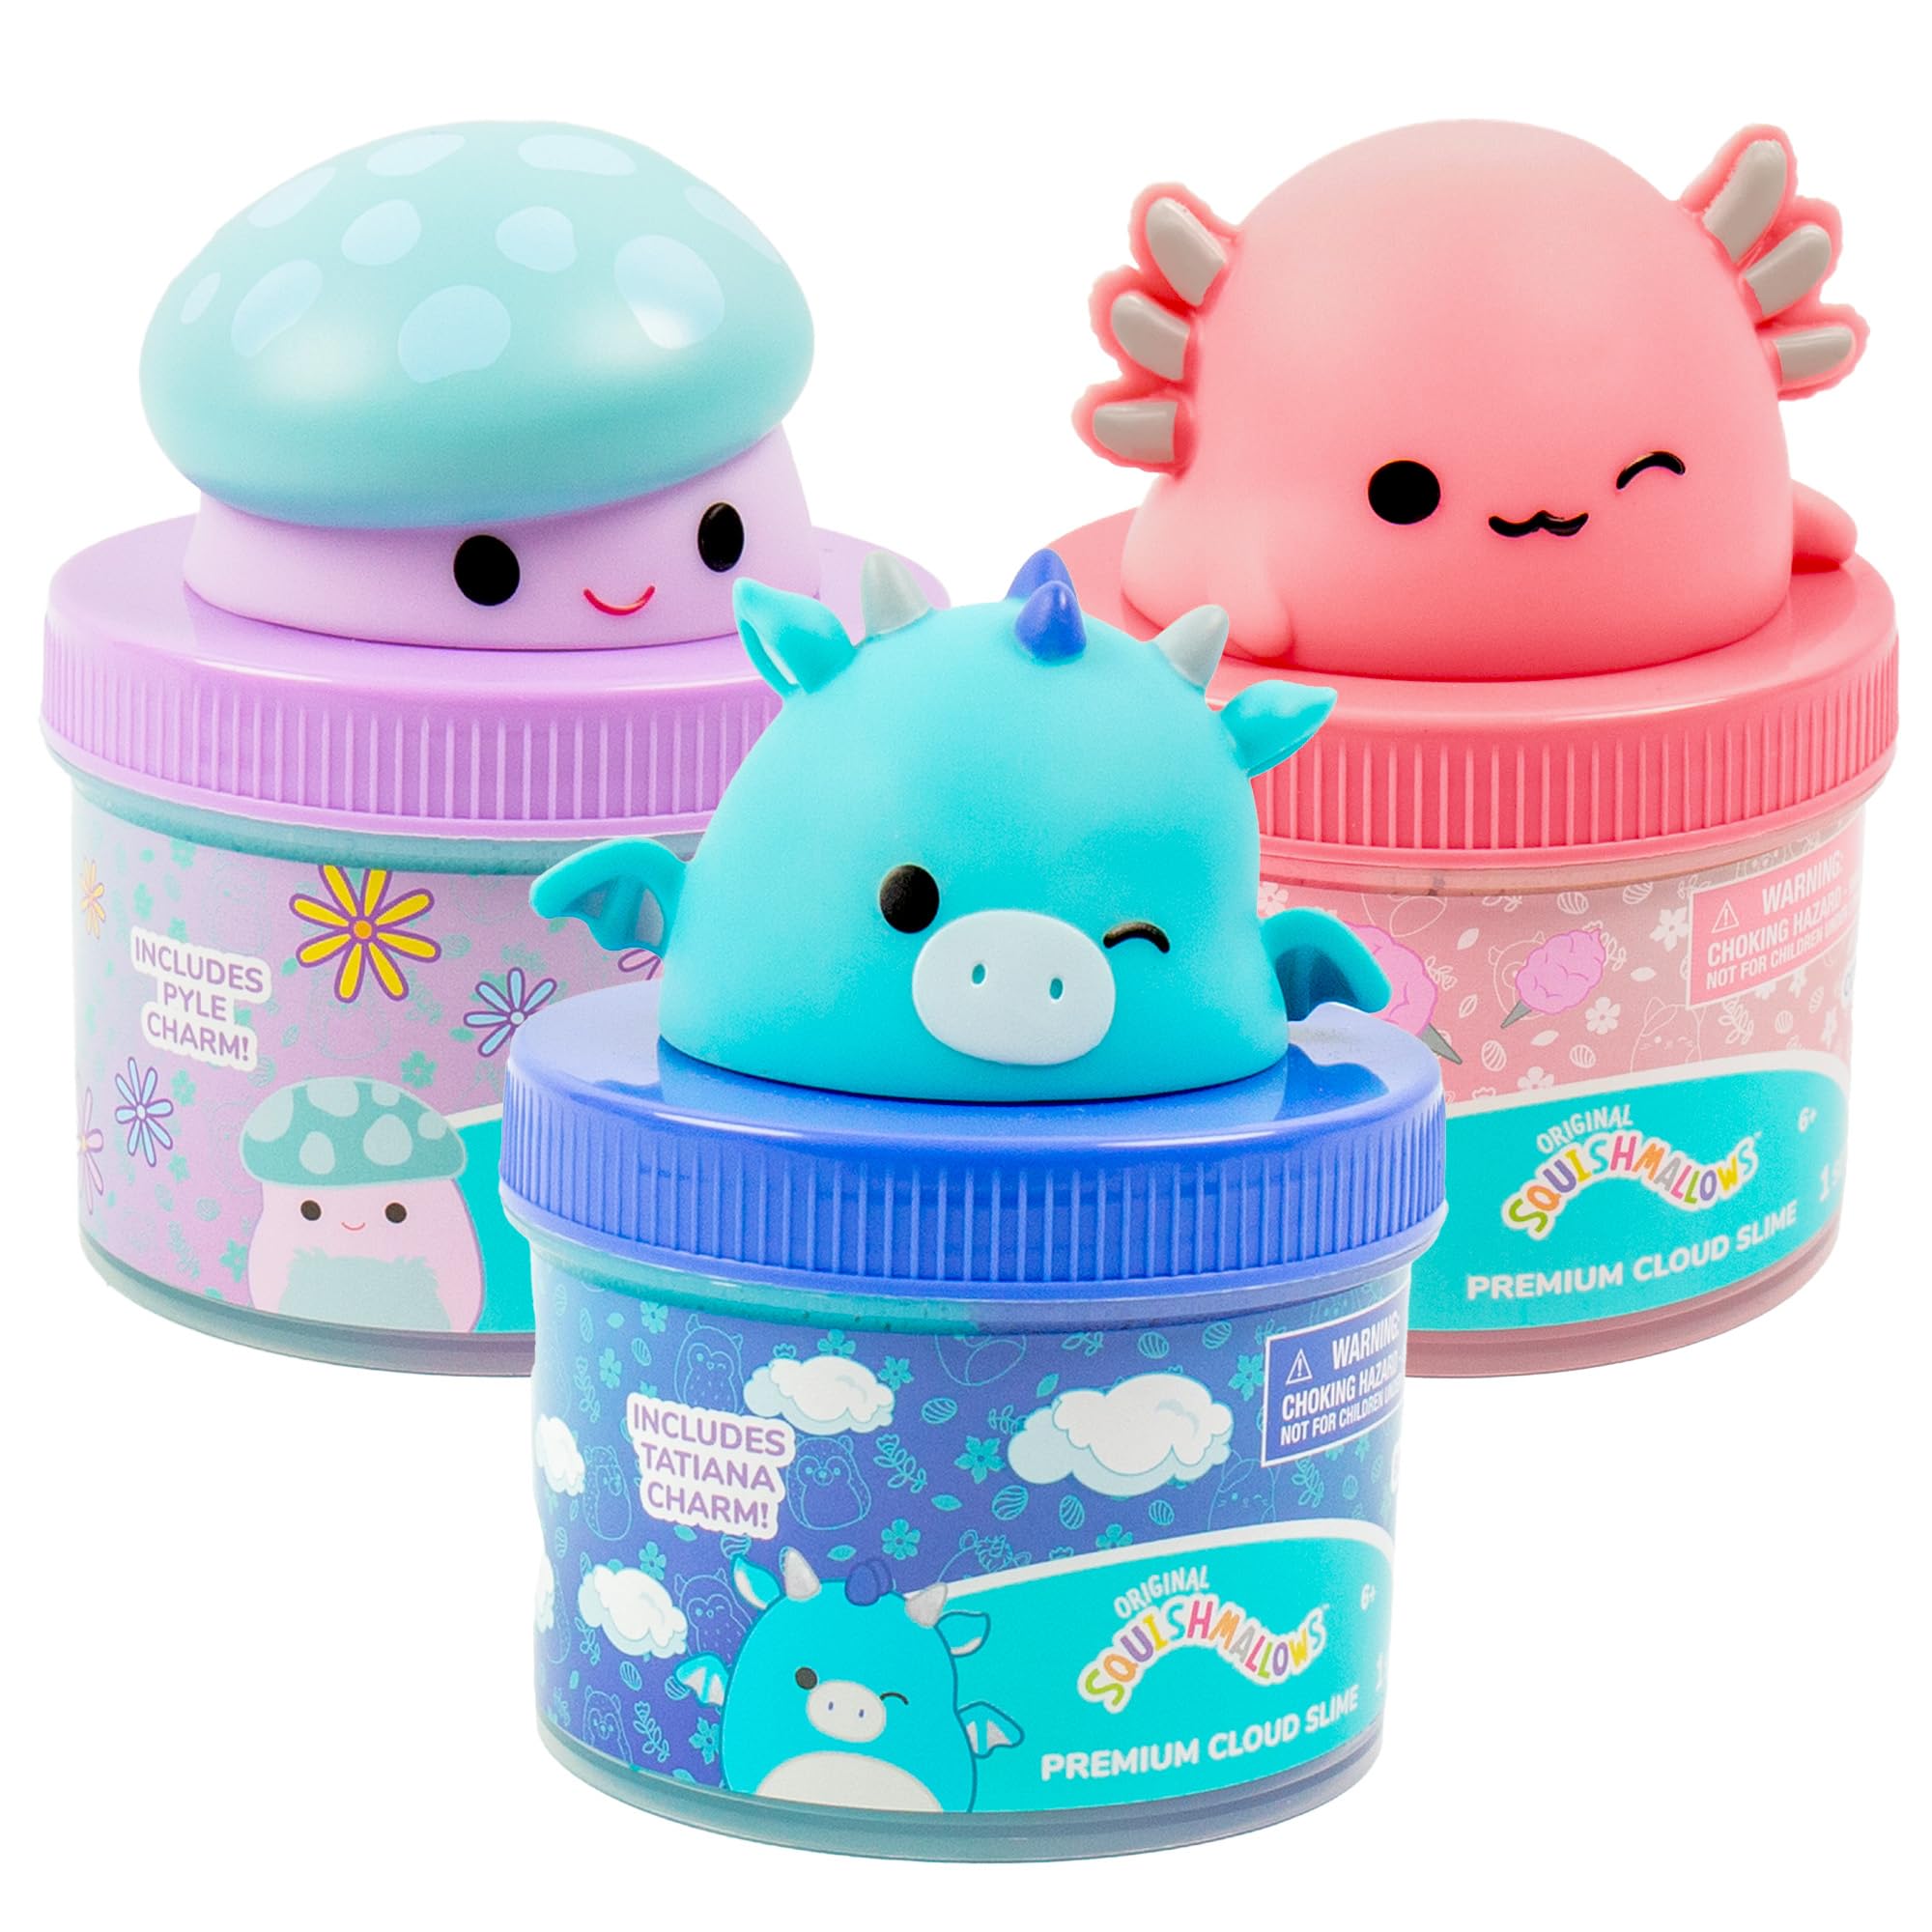 Original Squishmallows Premium Cloud Slime, 3-Pack, 8 oz. Fluffy Slime, Scented Slimes, Fun Slime Add Ins, Pre-Made Slime for Kids, Great 6 Year Old Toys, Super Soft Sludge Toy